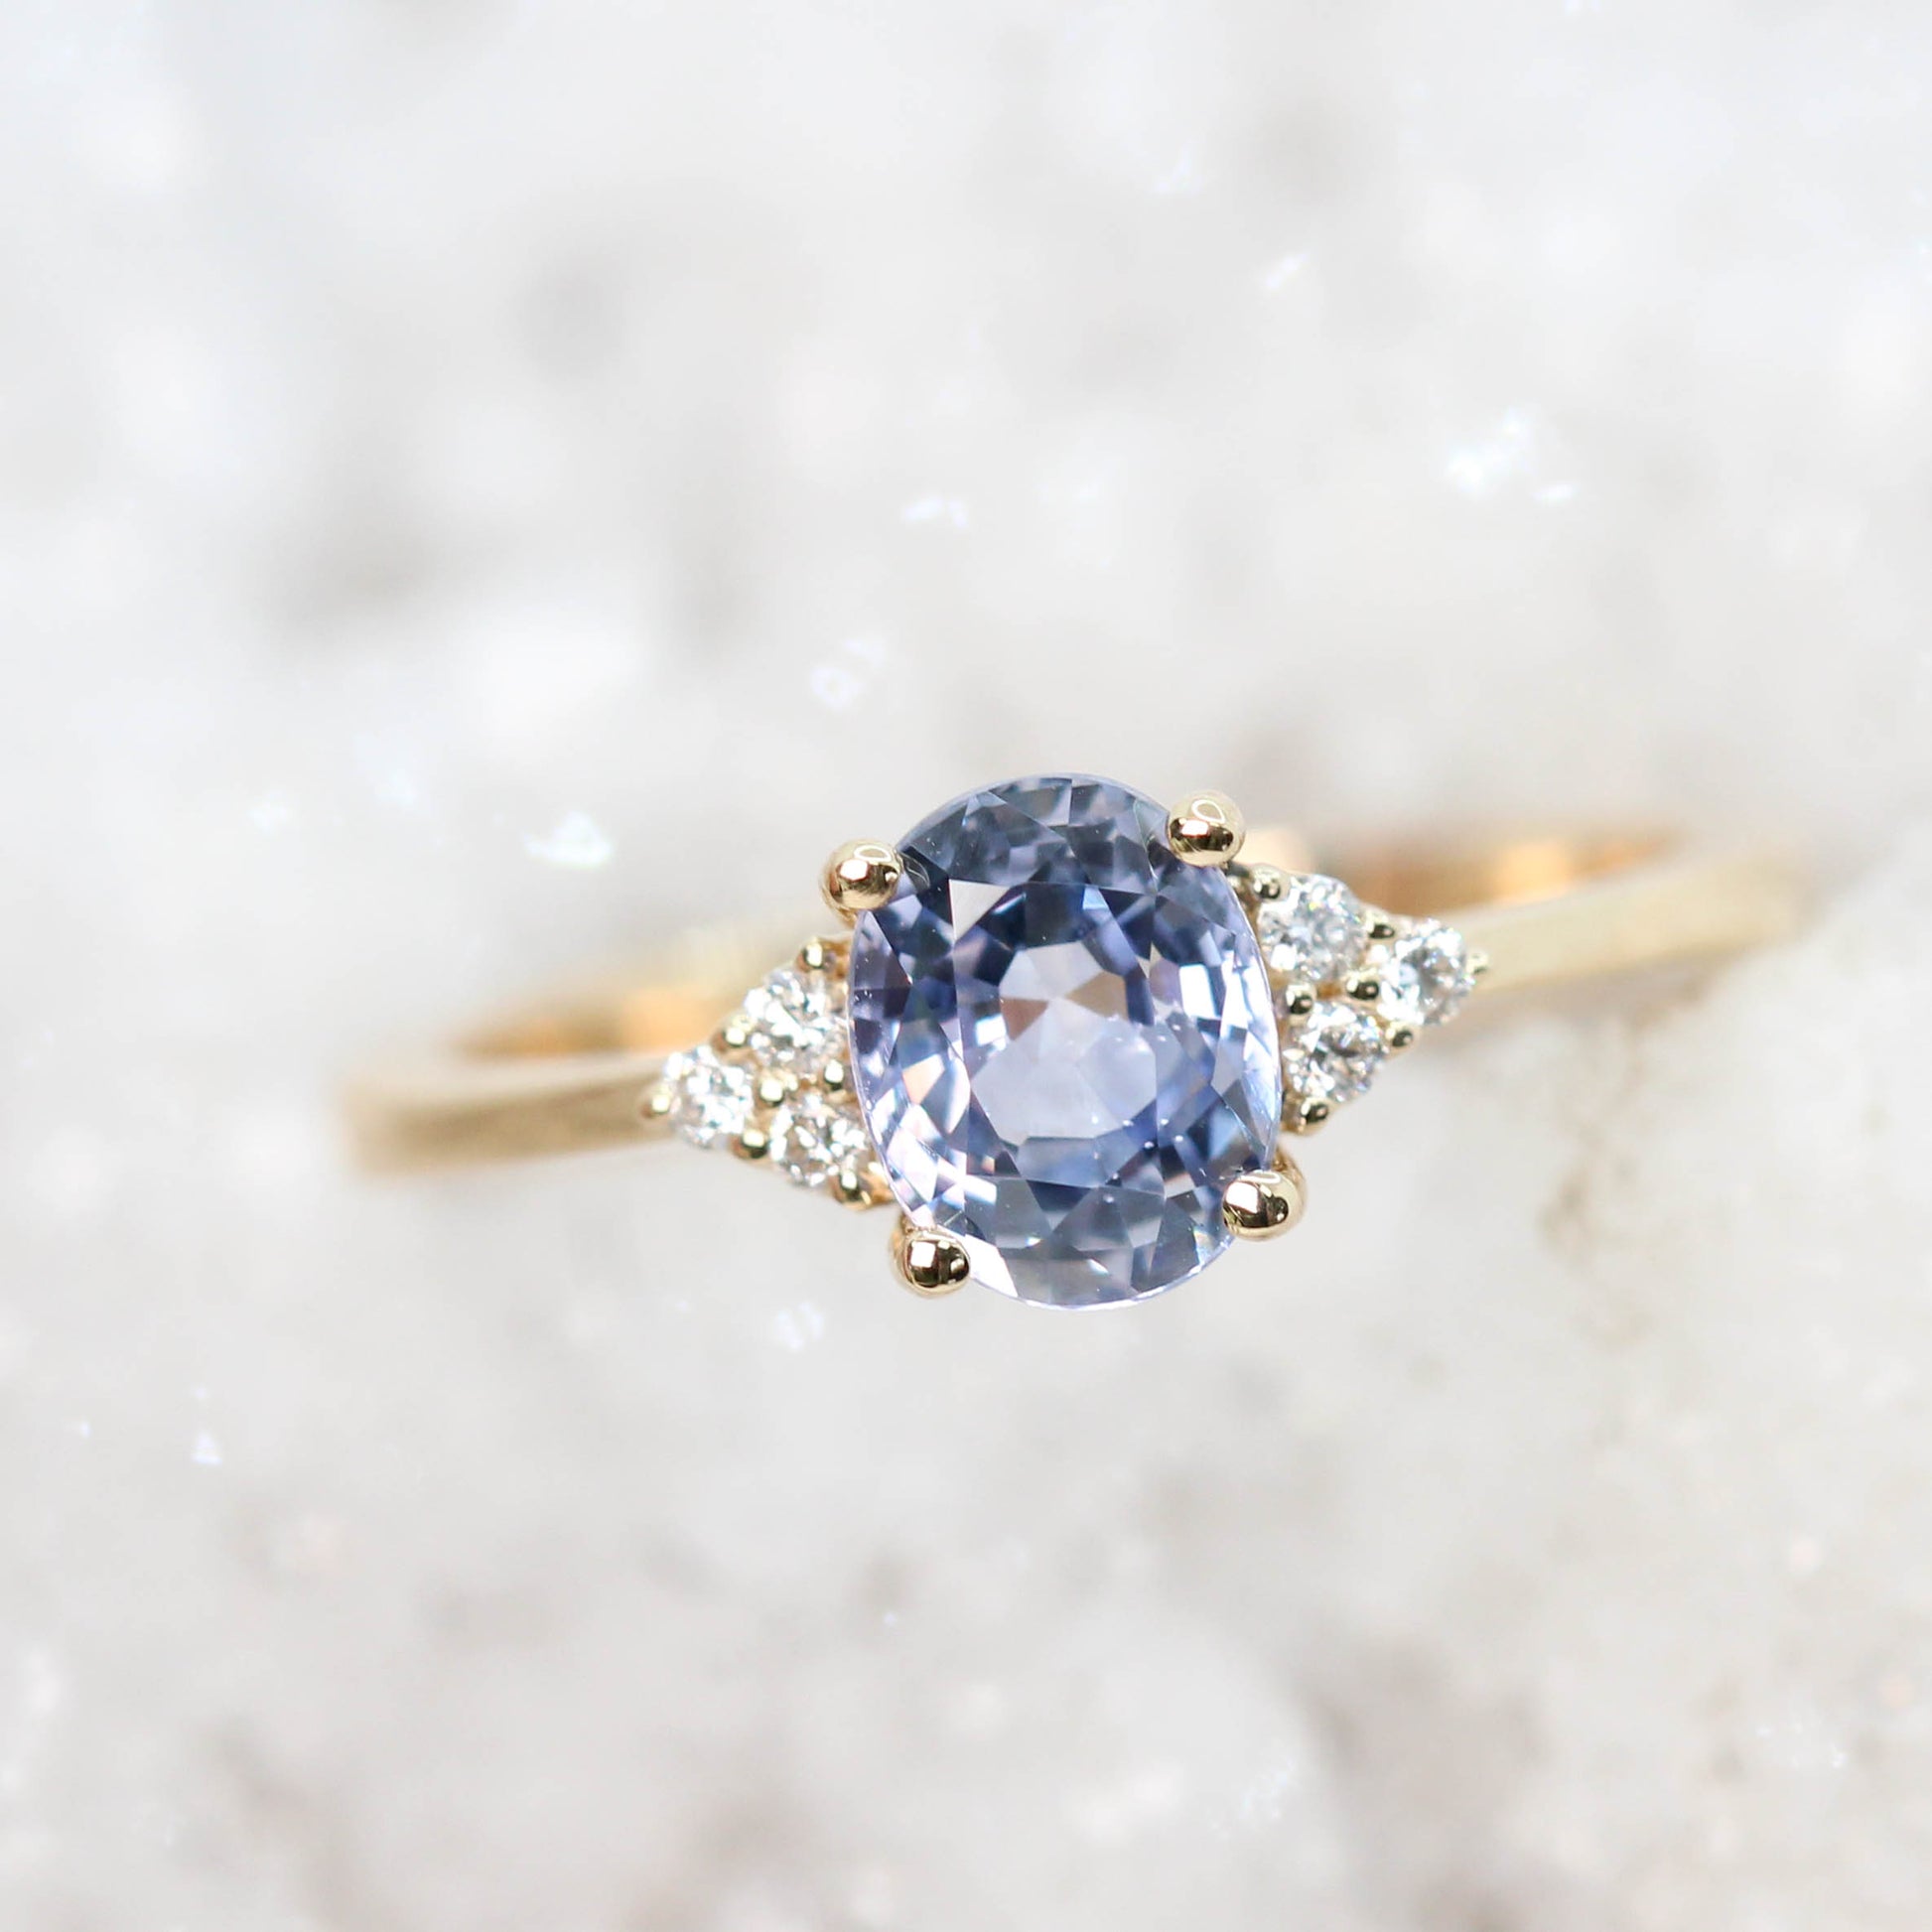 Imogene Ring with a 1.09 Carat Light Blue Sapphire and Accent Diamonds in 14k Yellow Gold - Ready to Size and Ship - Midwinter Co. Alternative Bridal Rings and Modern Fine Jewelry